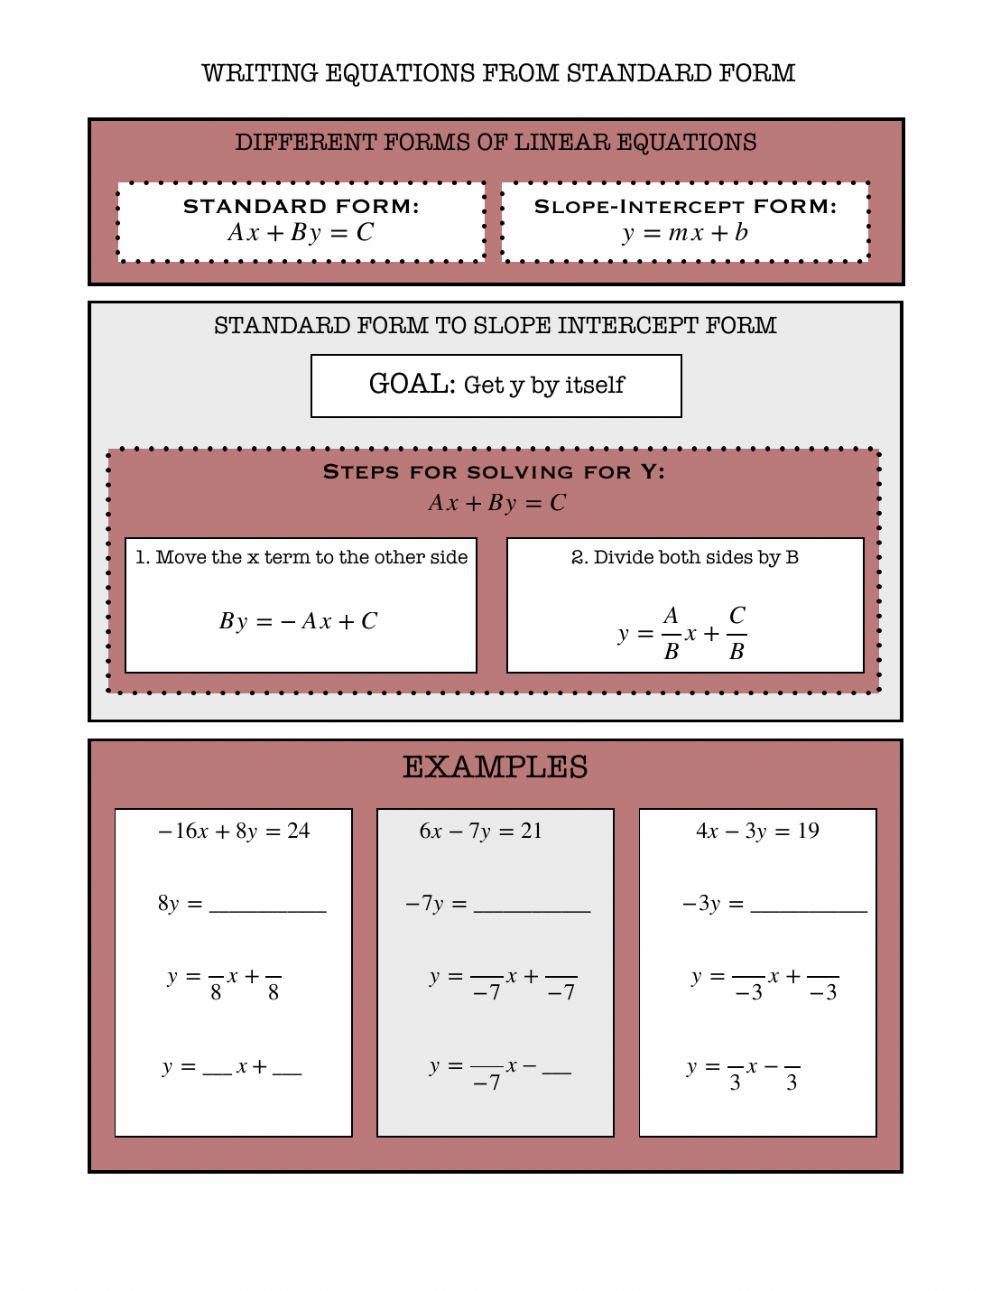 Writing Equations from Standard Form to Slope Intercept Form